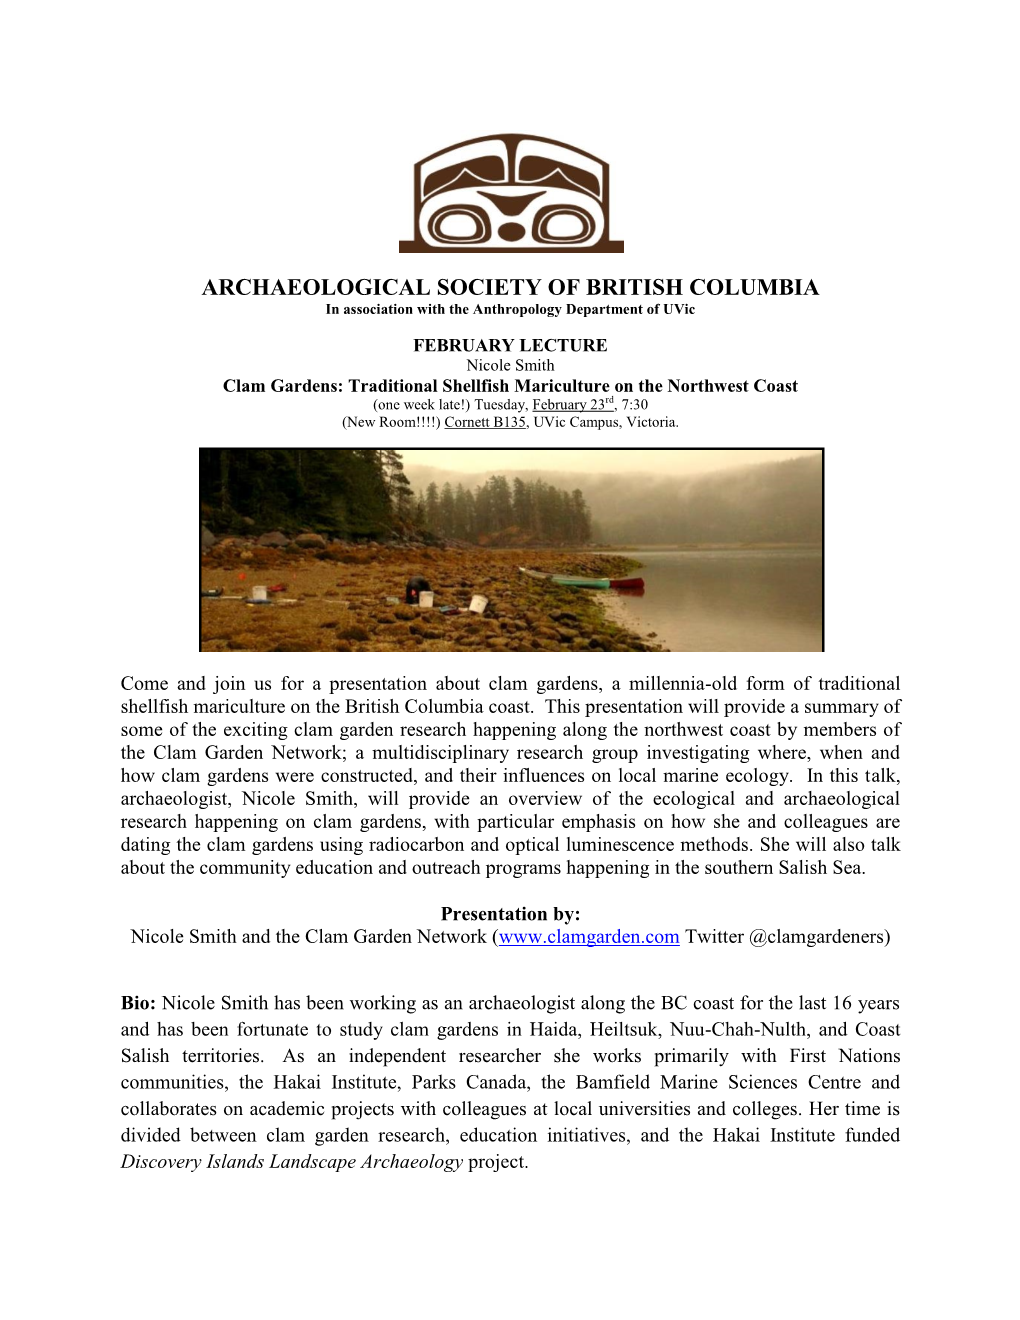 ARCHAEOLOGICAL SOCIETY of BRITISH COLUMBIA in Association with the Anthropology Department of Uvic